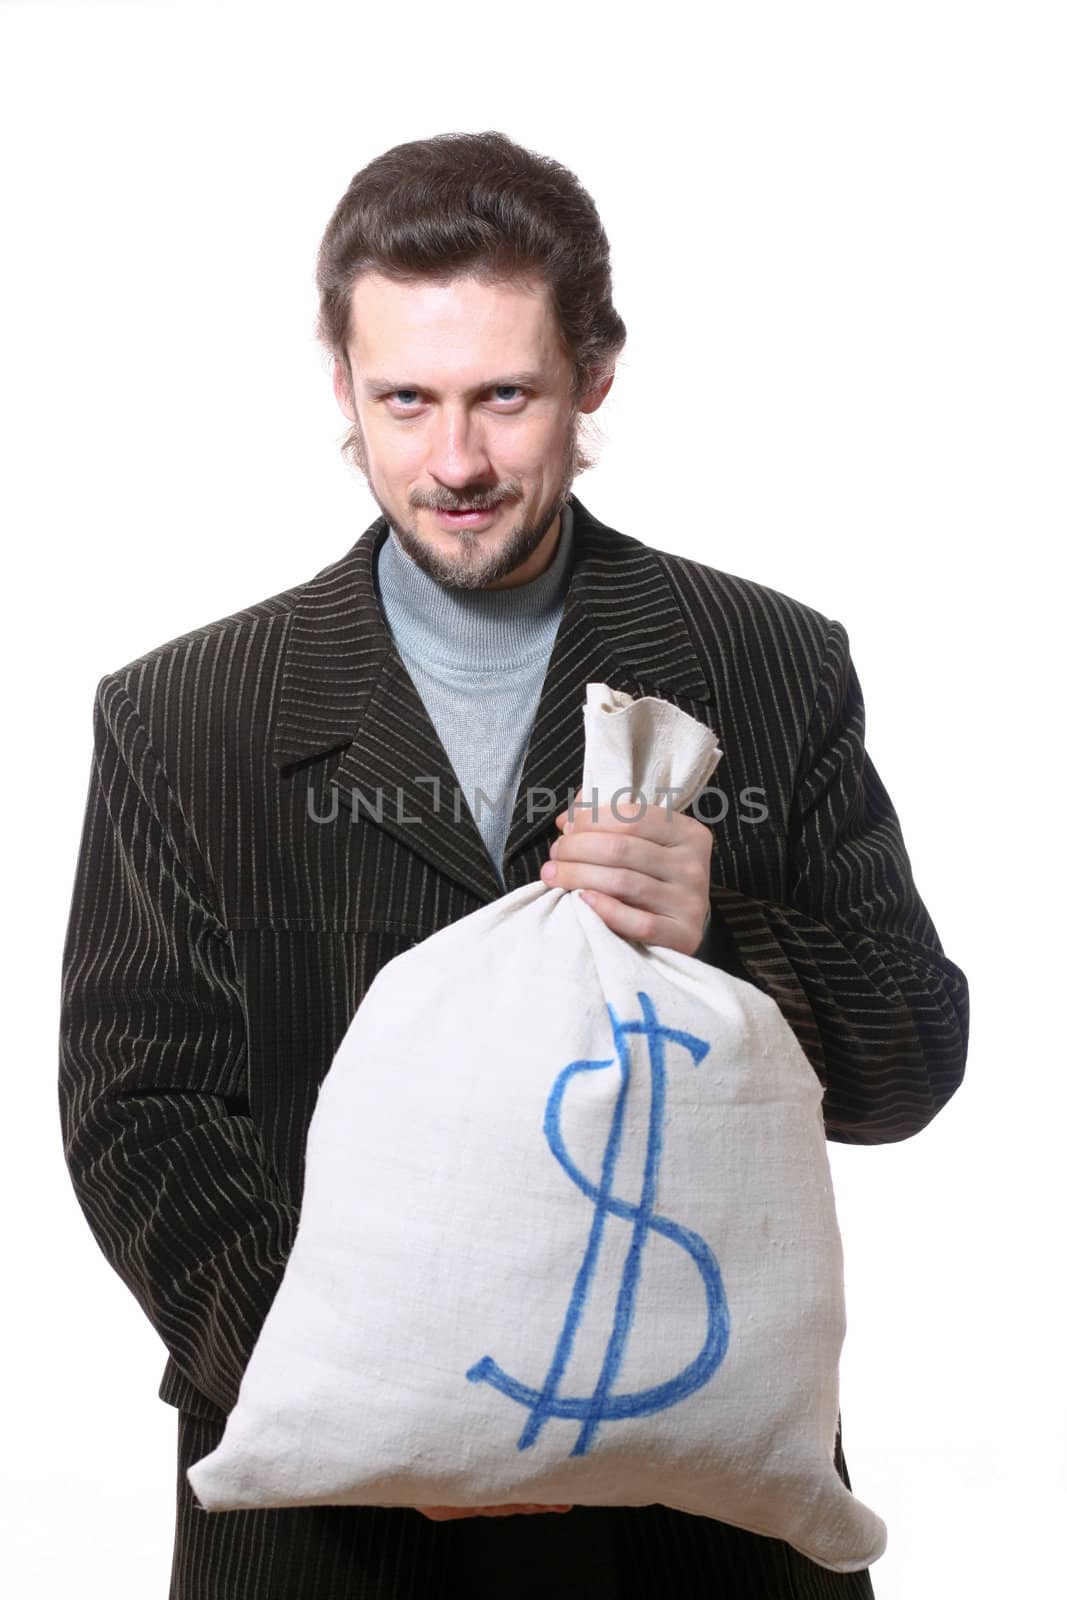 An image of a young man with a bag